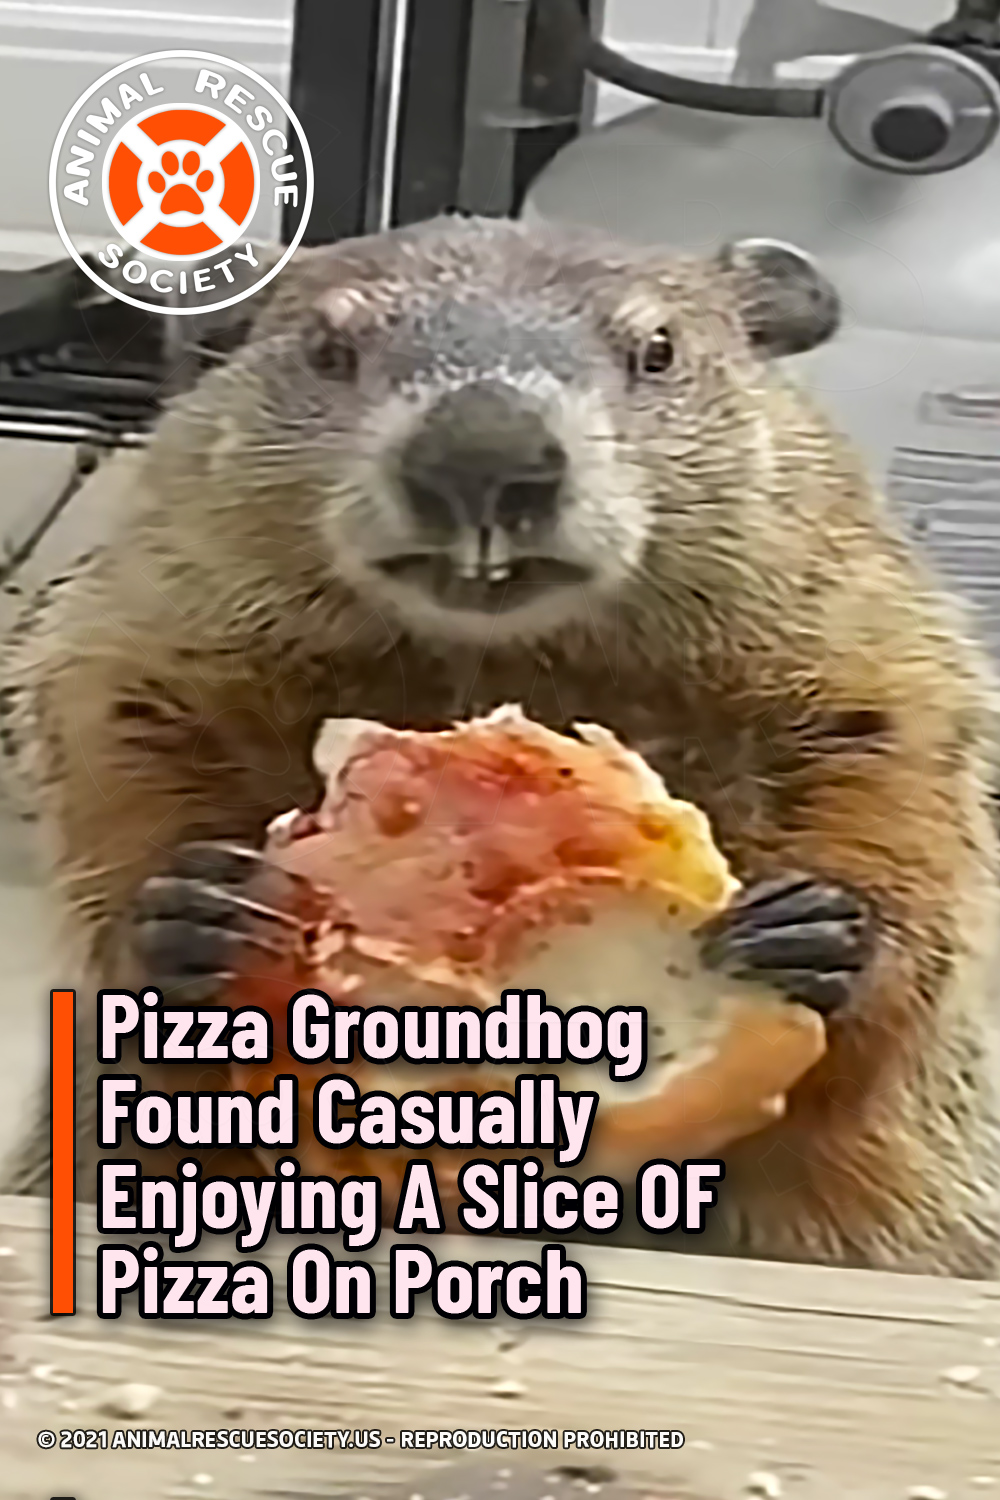 Pizza Groundhog Found Casually Enjoying A Slice OF Pizza On Porch